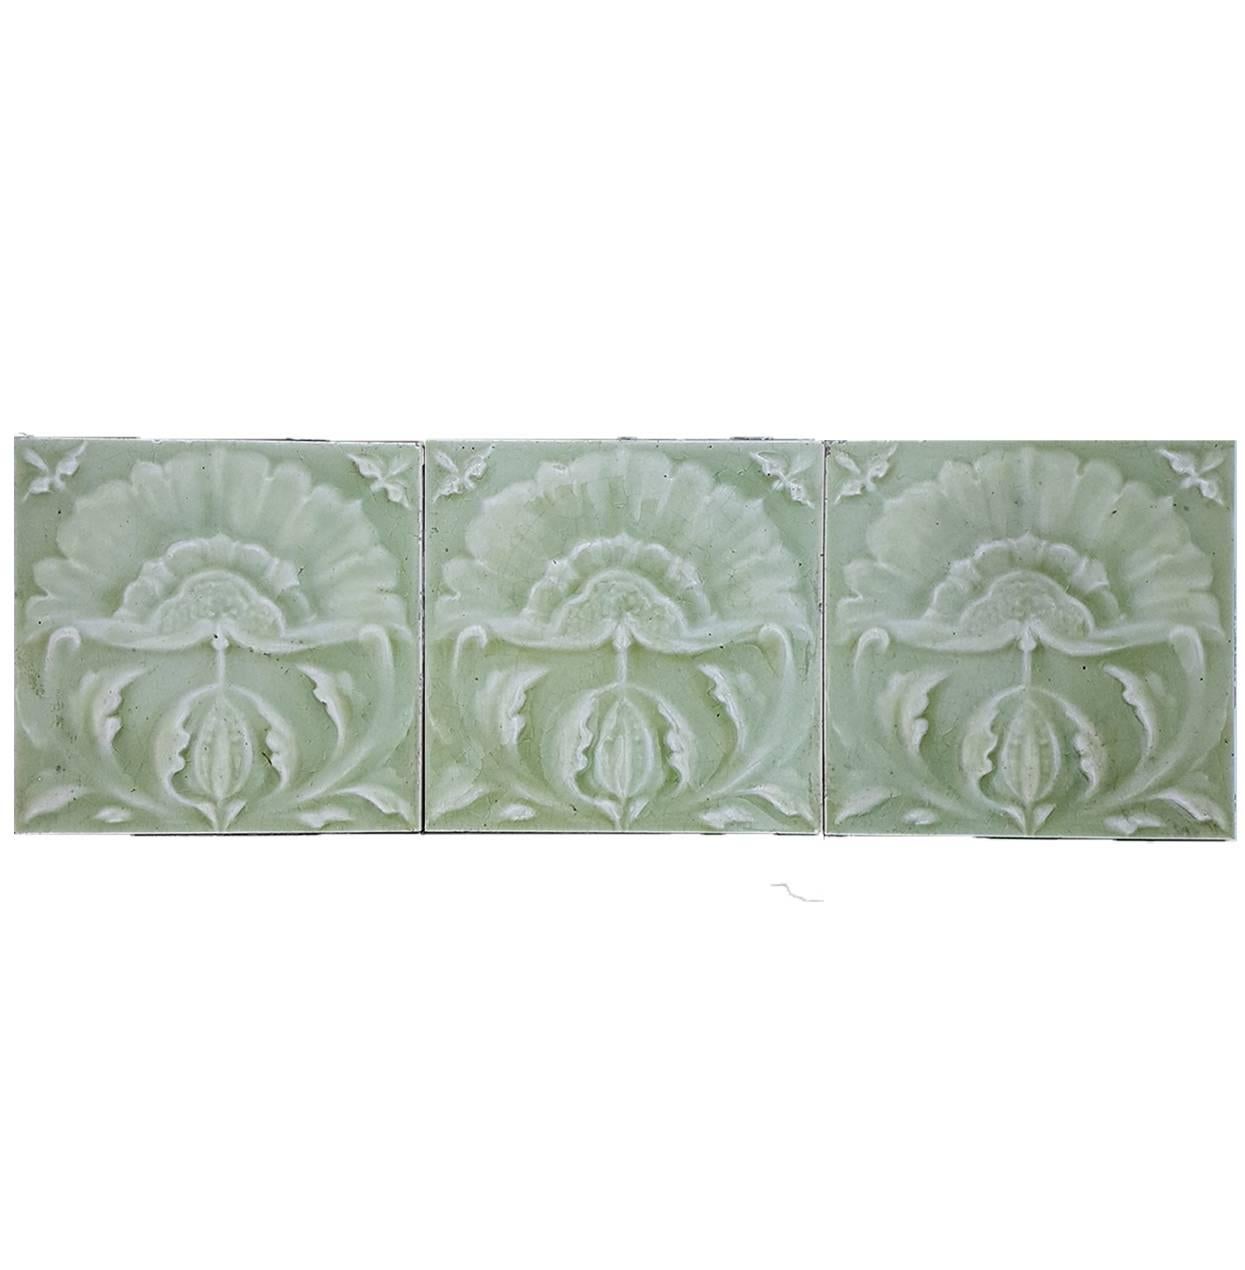 Early 20th Century 1 of the 20 Art Nouveau Relief Tiles by Craven Dunnill, & Co., 1905